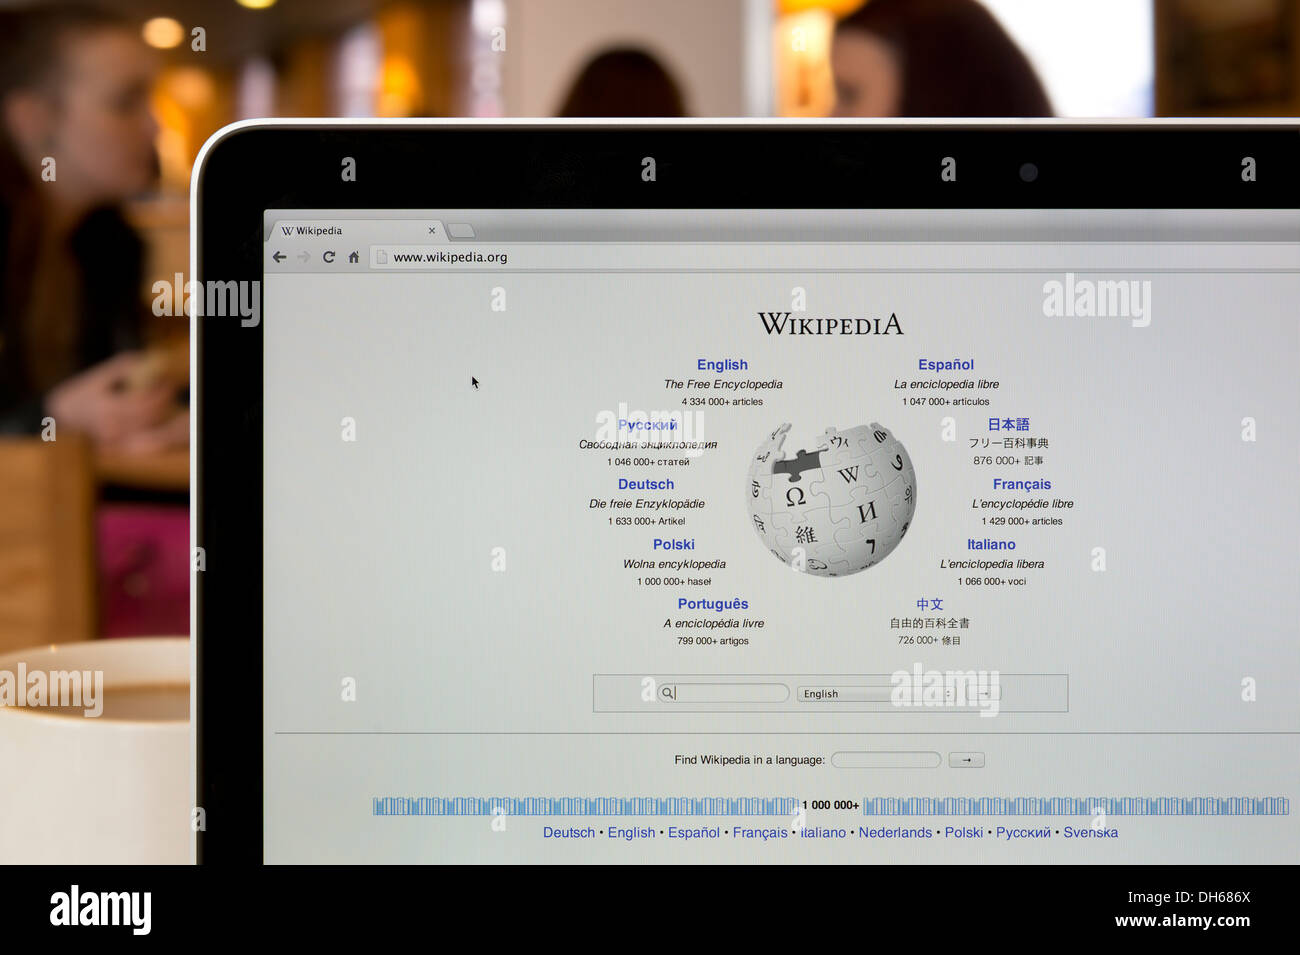 The Wikipedia website shot in a coffee shop environment (Editorial use only: print, TV, e-book and editorial website). Stock Photo